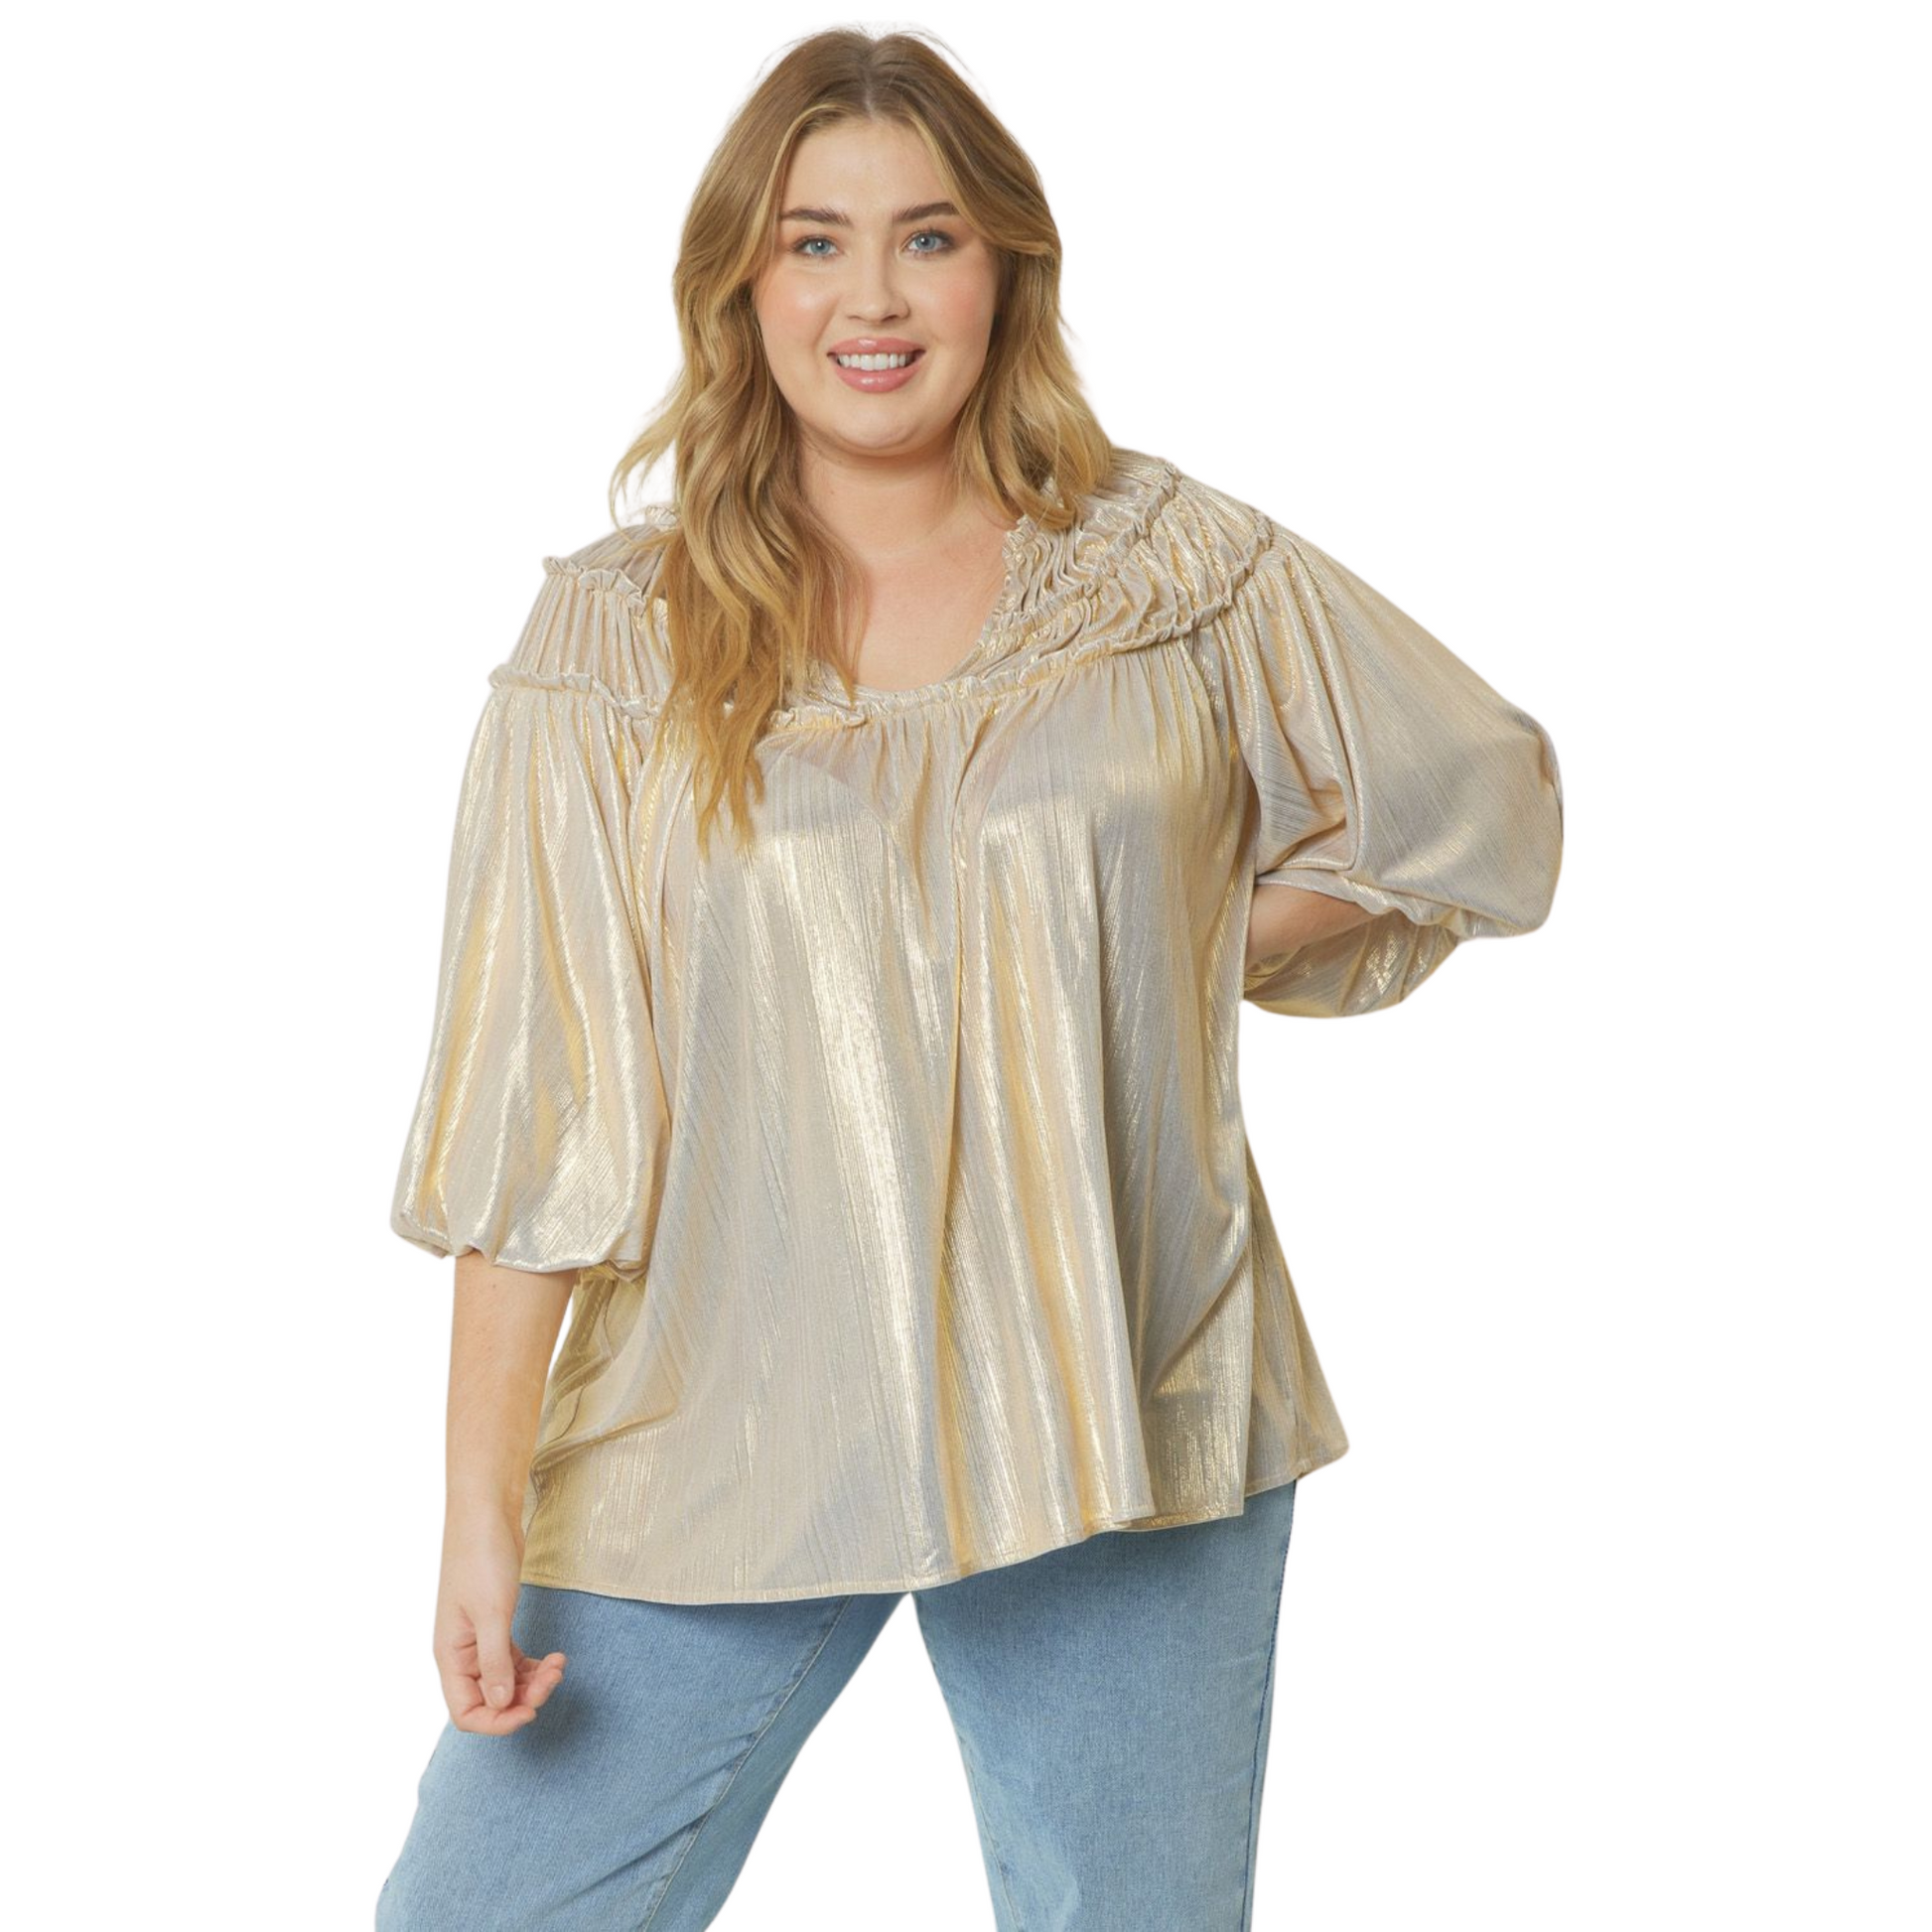 Introducing the Pleated Half Sleeve Top, the perfect addition to your wardrobe. This top not only features a stunning champagne color and pleated metallic design, but also has a lightweight and non-sheer material for comfortable wear. Its pleat detailing at the shoulders adds a touch of sophistication, making it suitable for all occasions. Available in plus size for a flattering fit.